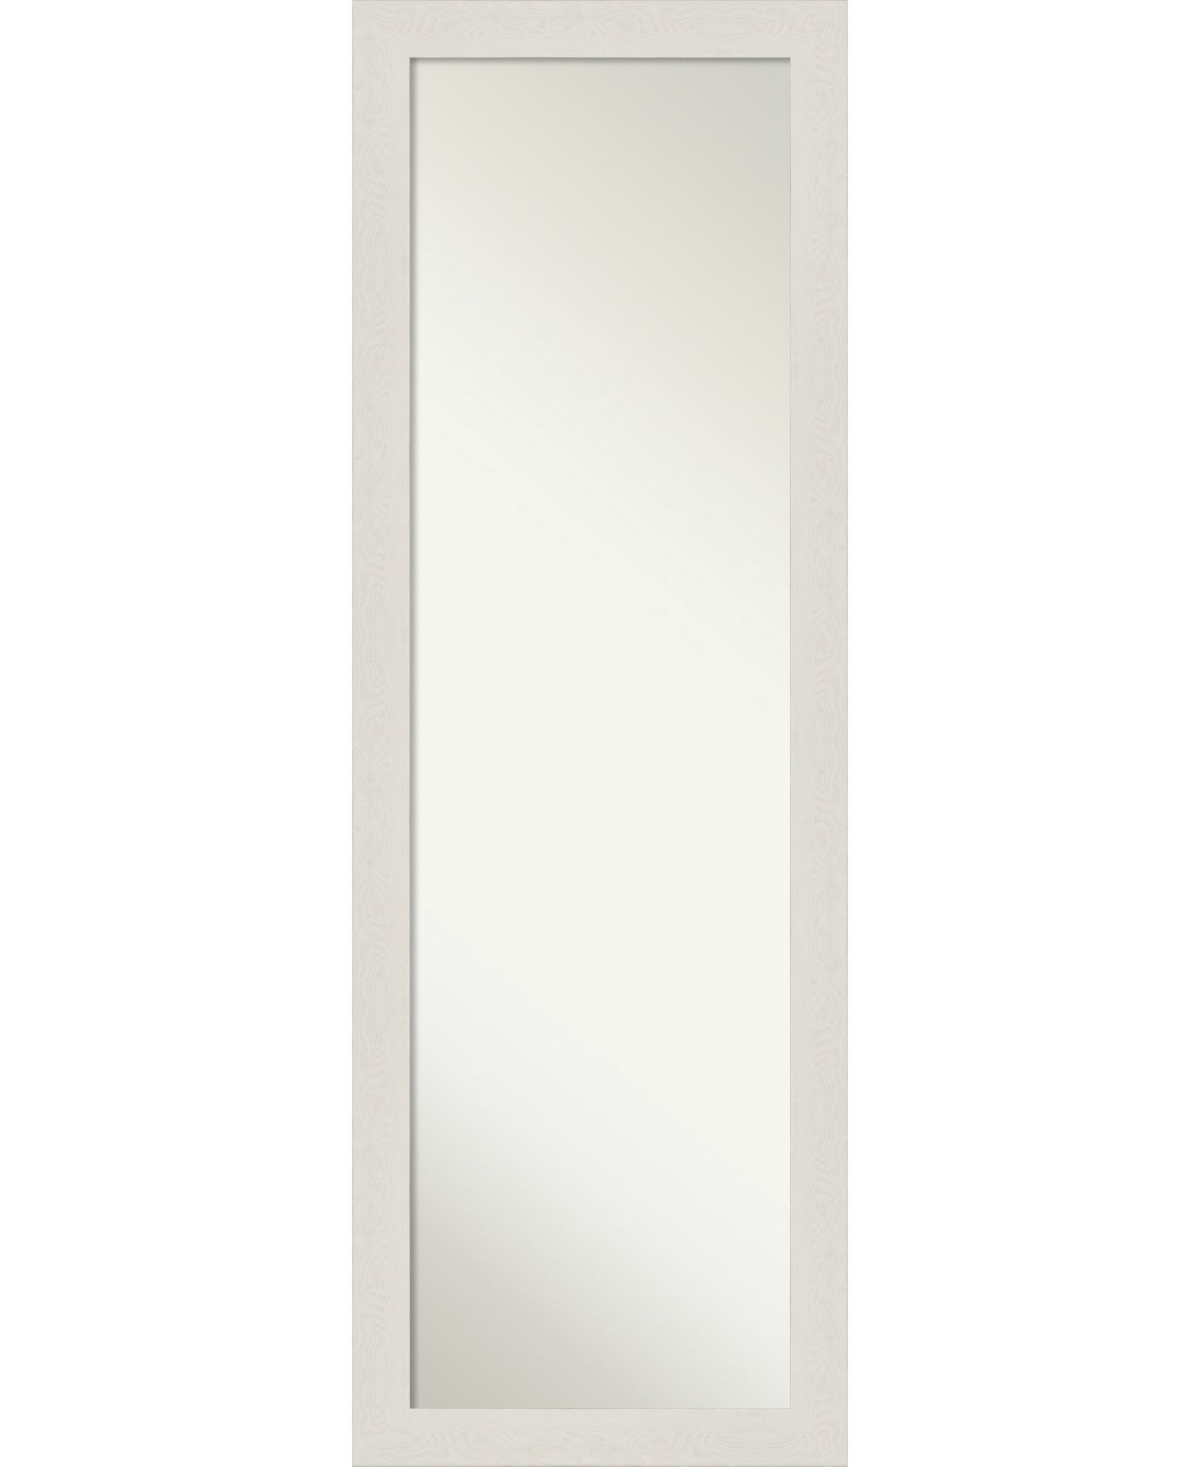 Rustic Plank on The Door Full Length Mirror, 17.38" x 51.38" - White